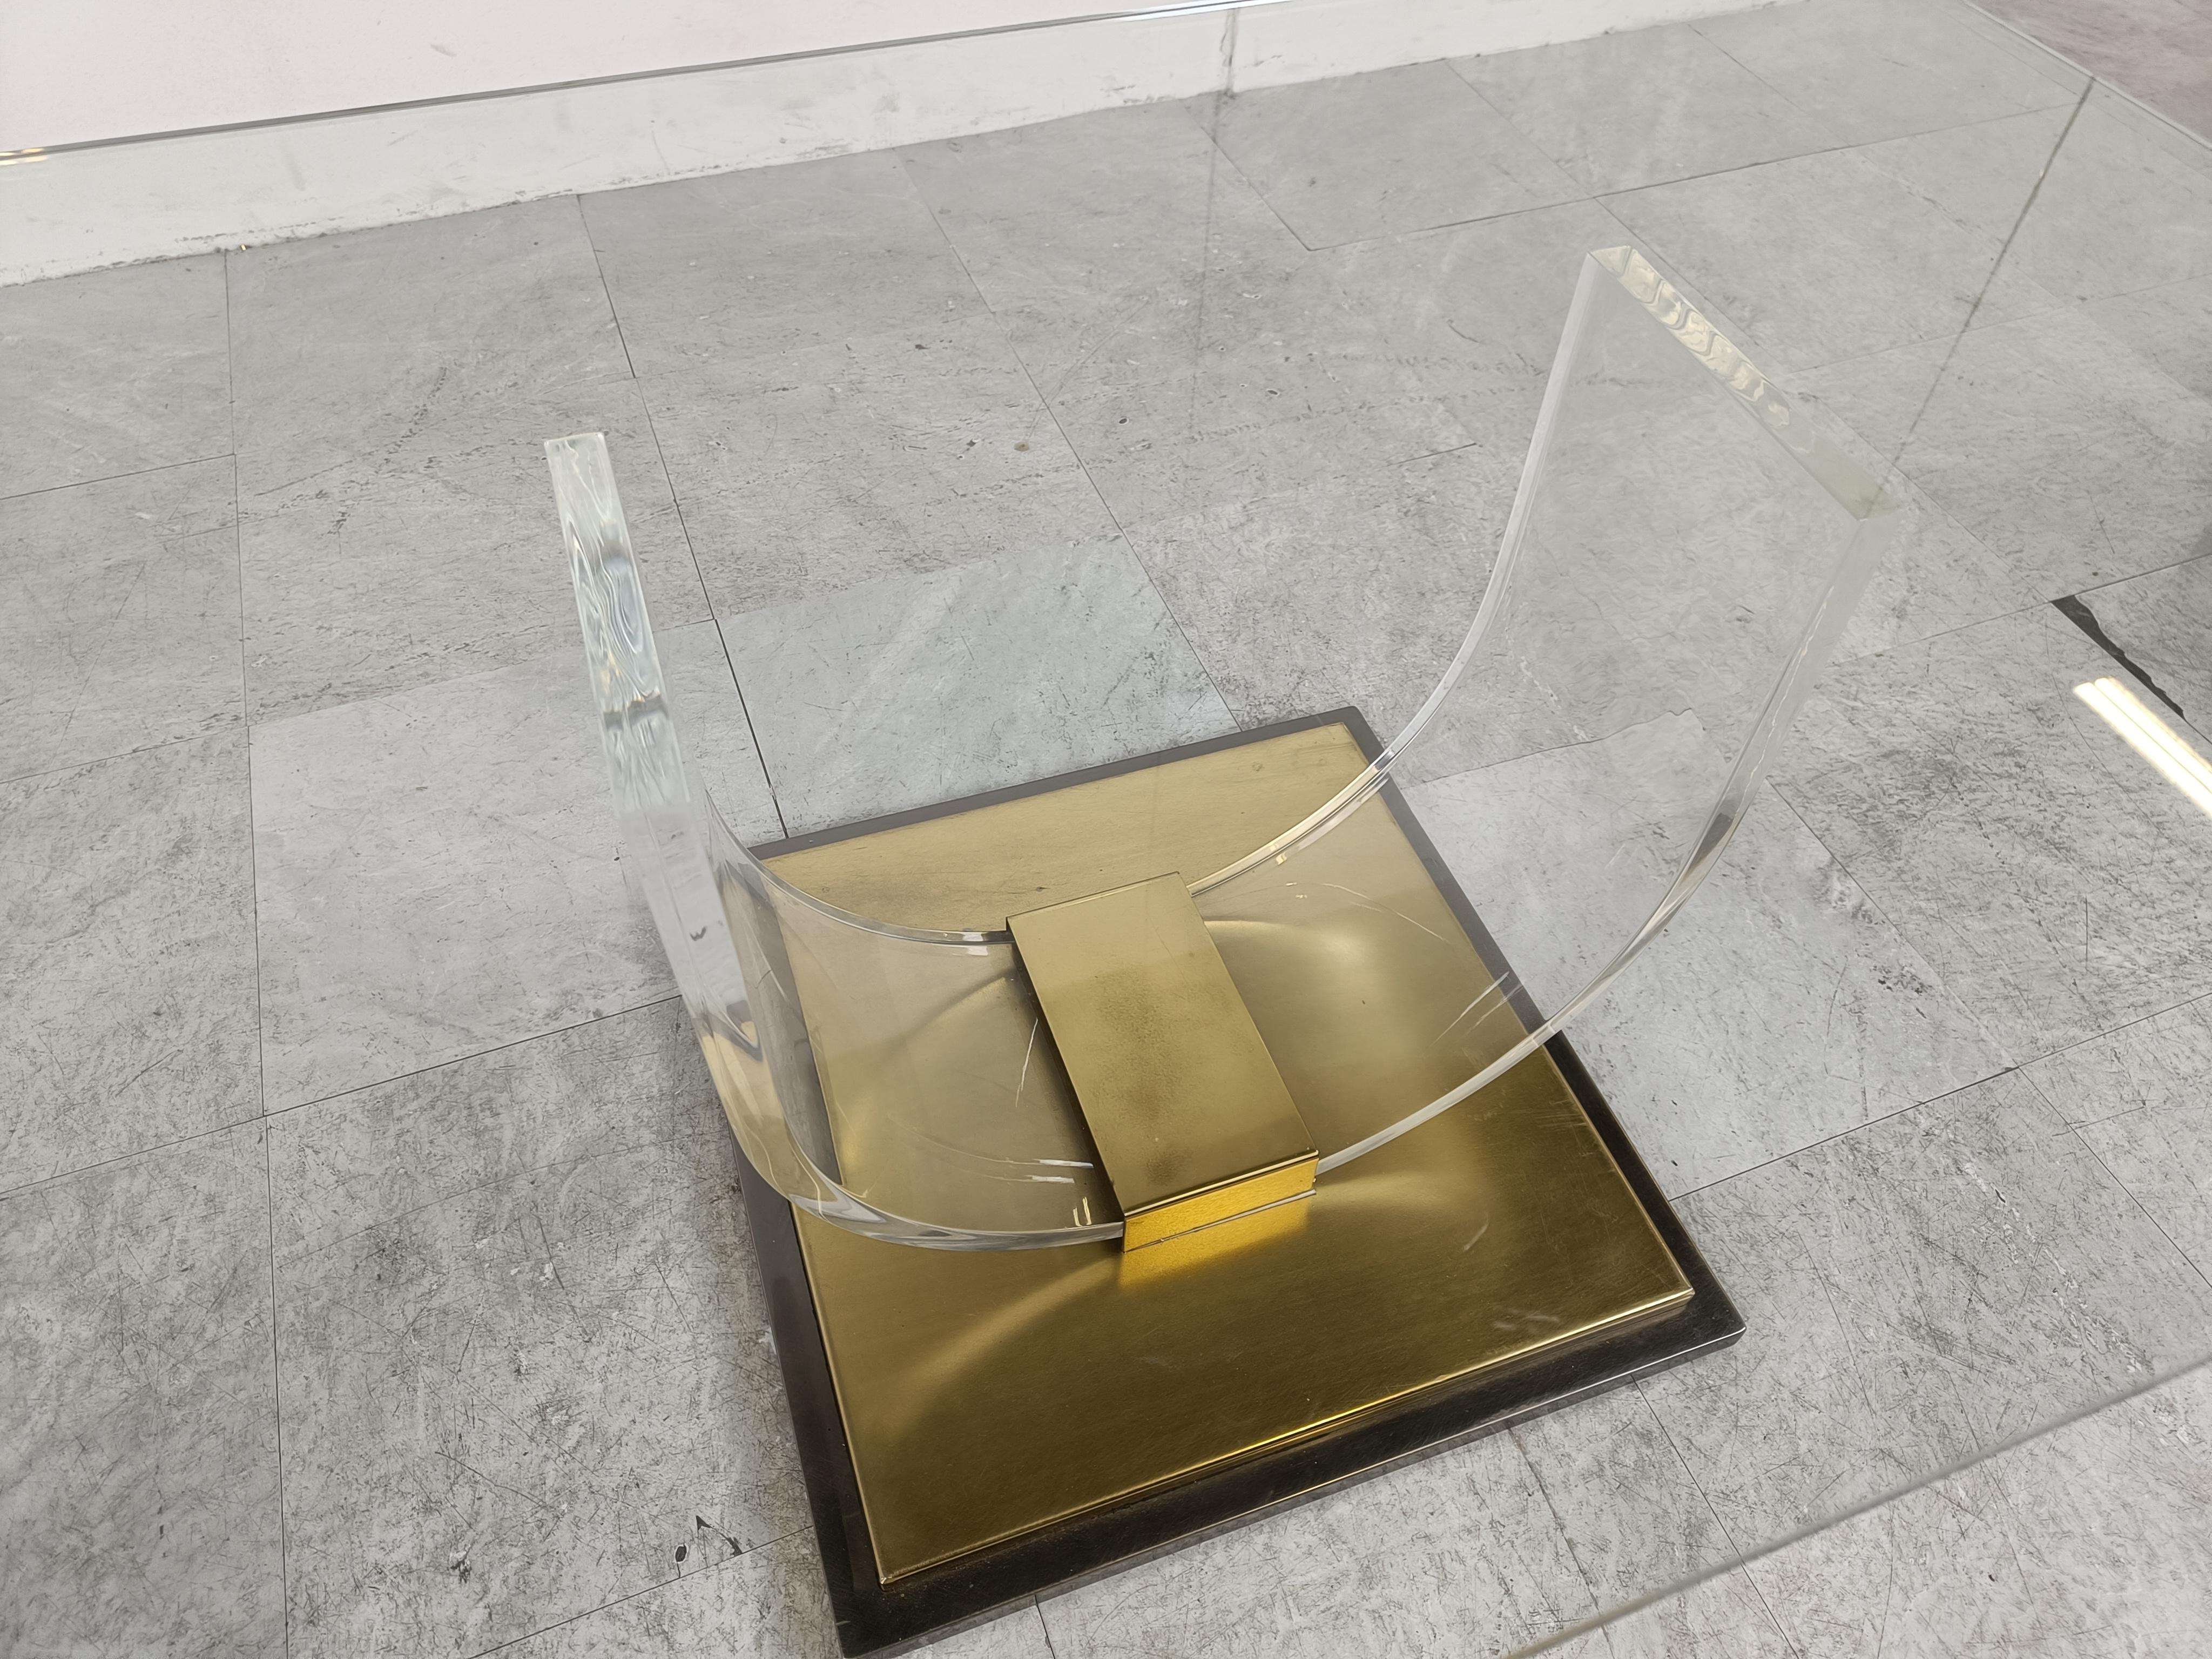 'arch' coffee table with a rectangular glass top by Charles Hollis Jones and made by Belgochrom.

Made from a lucite frame mounted on a heavy brass base.

Patina on the brass.

1970s - Belgium

Dimensions:
Height: 43cm/16.92